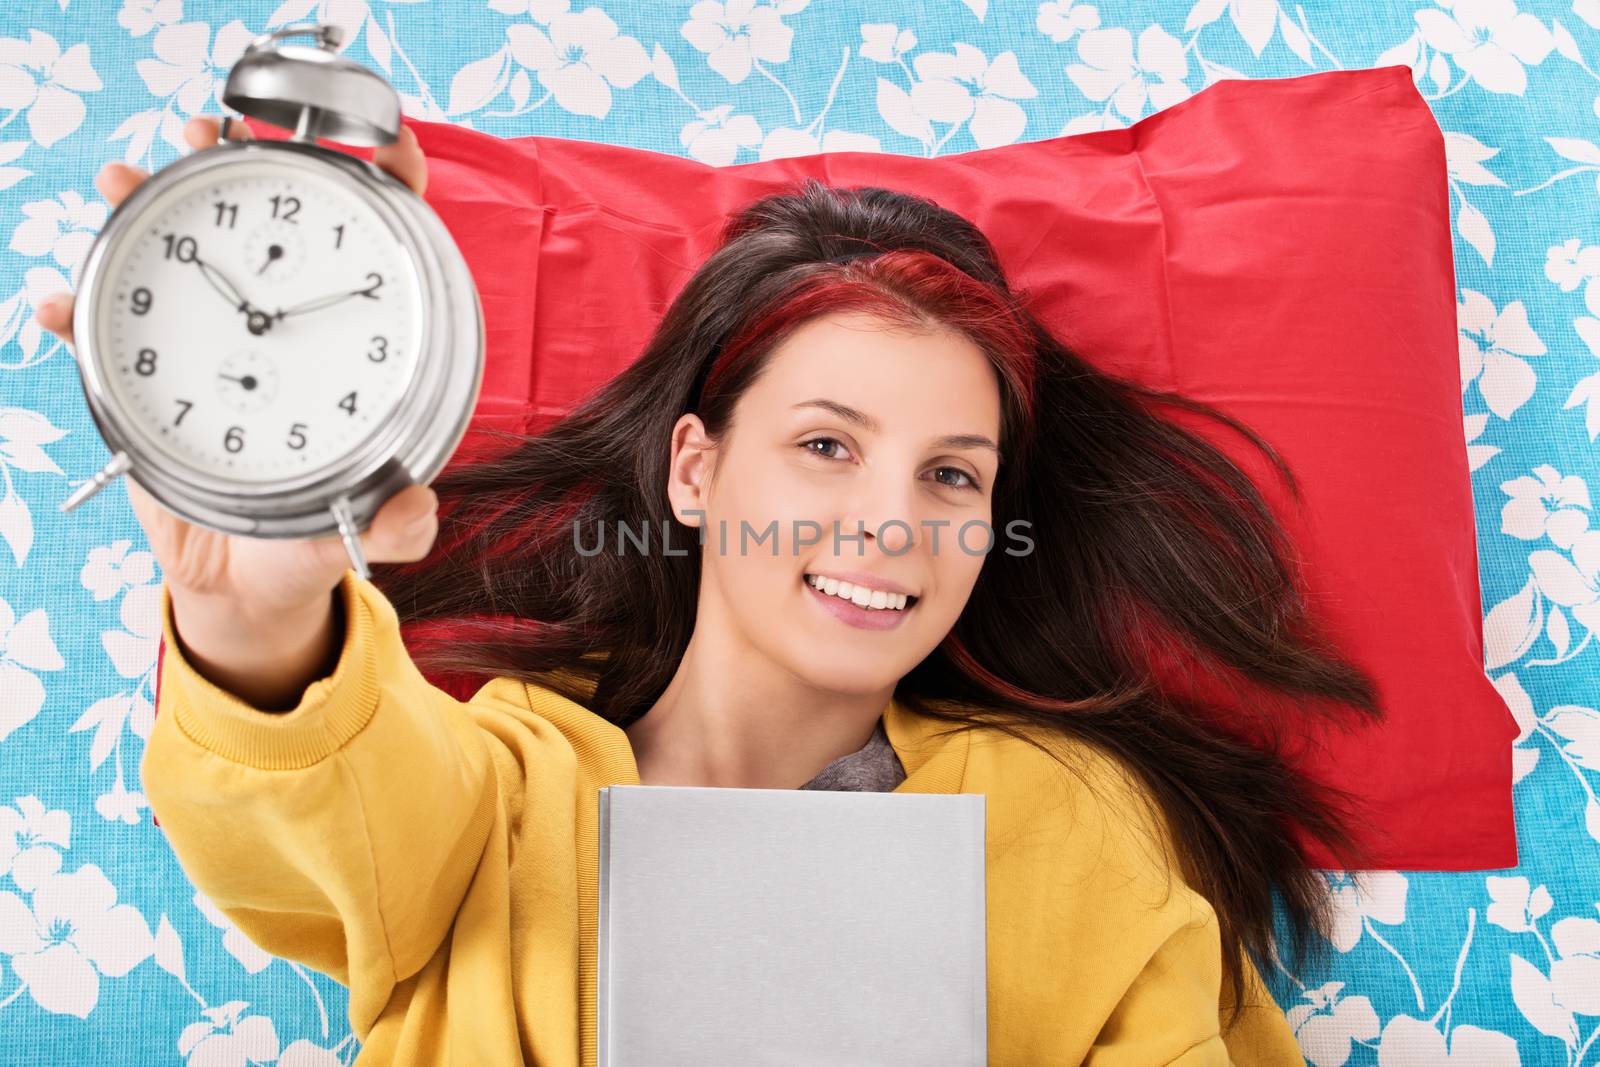 Done my reading right on time. Young girl lying in bed, holding a book and alarm clock. I'm done with my studying.